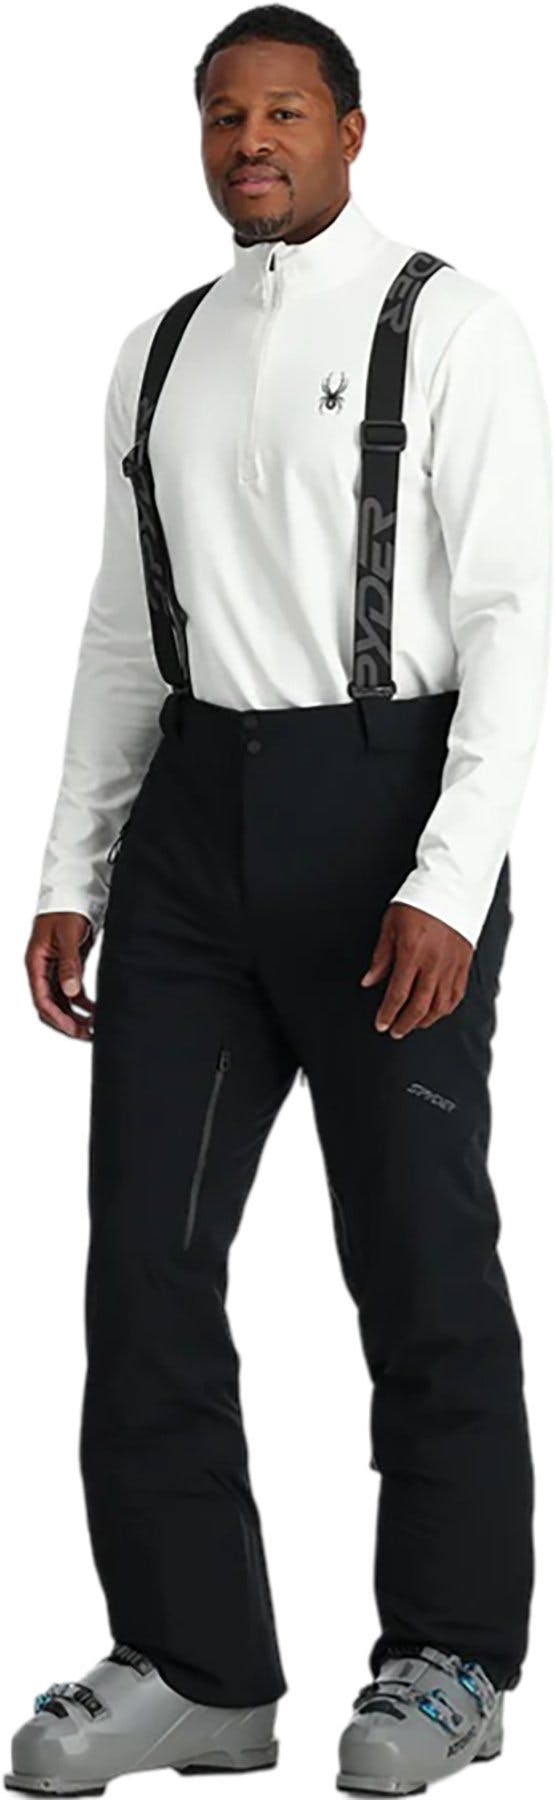 Product image for Bormio Insulated Pant - Men's